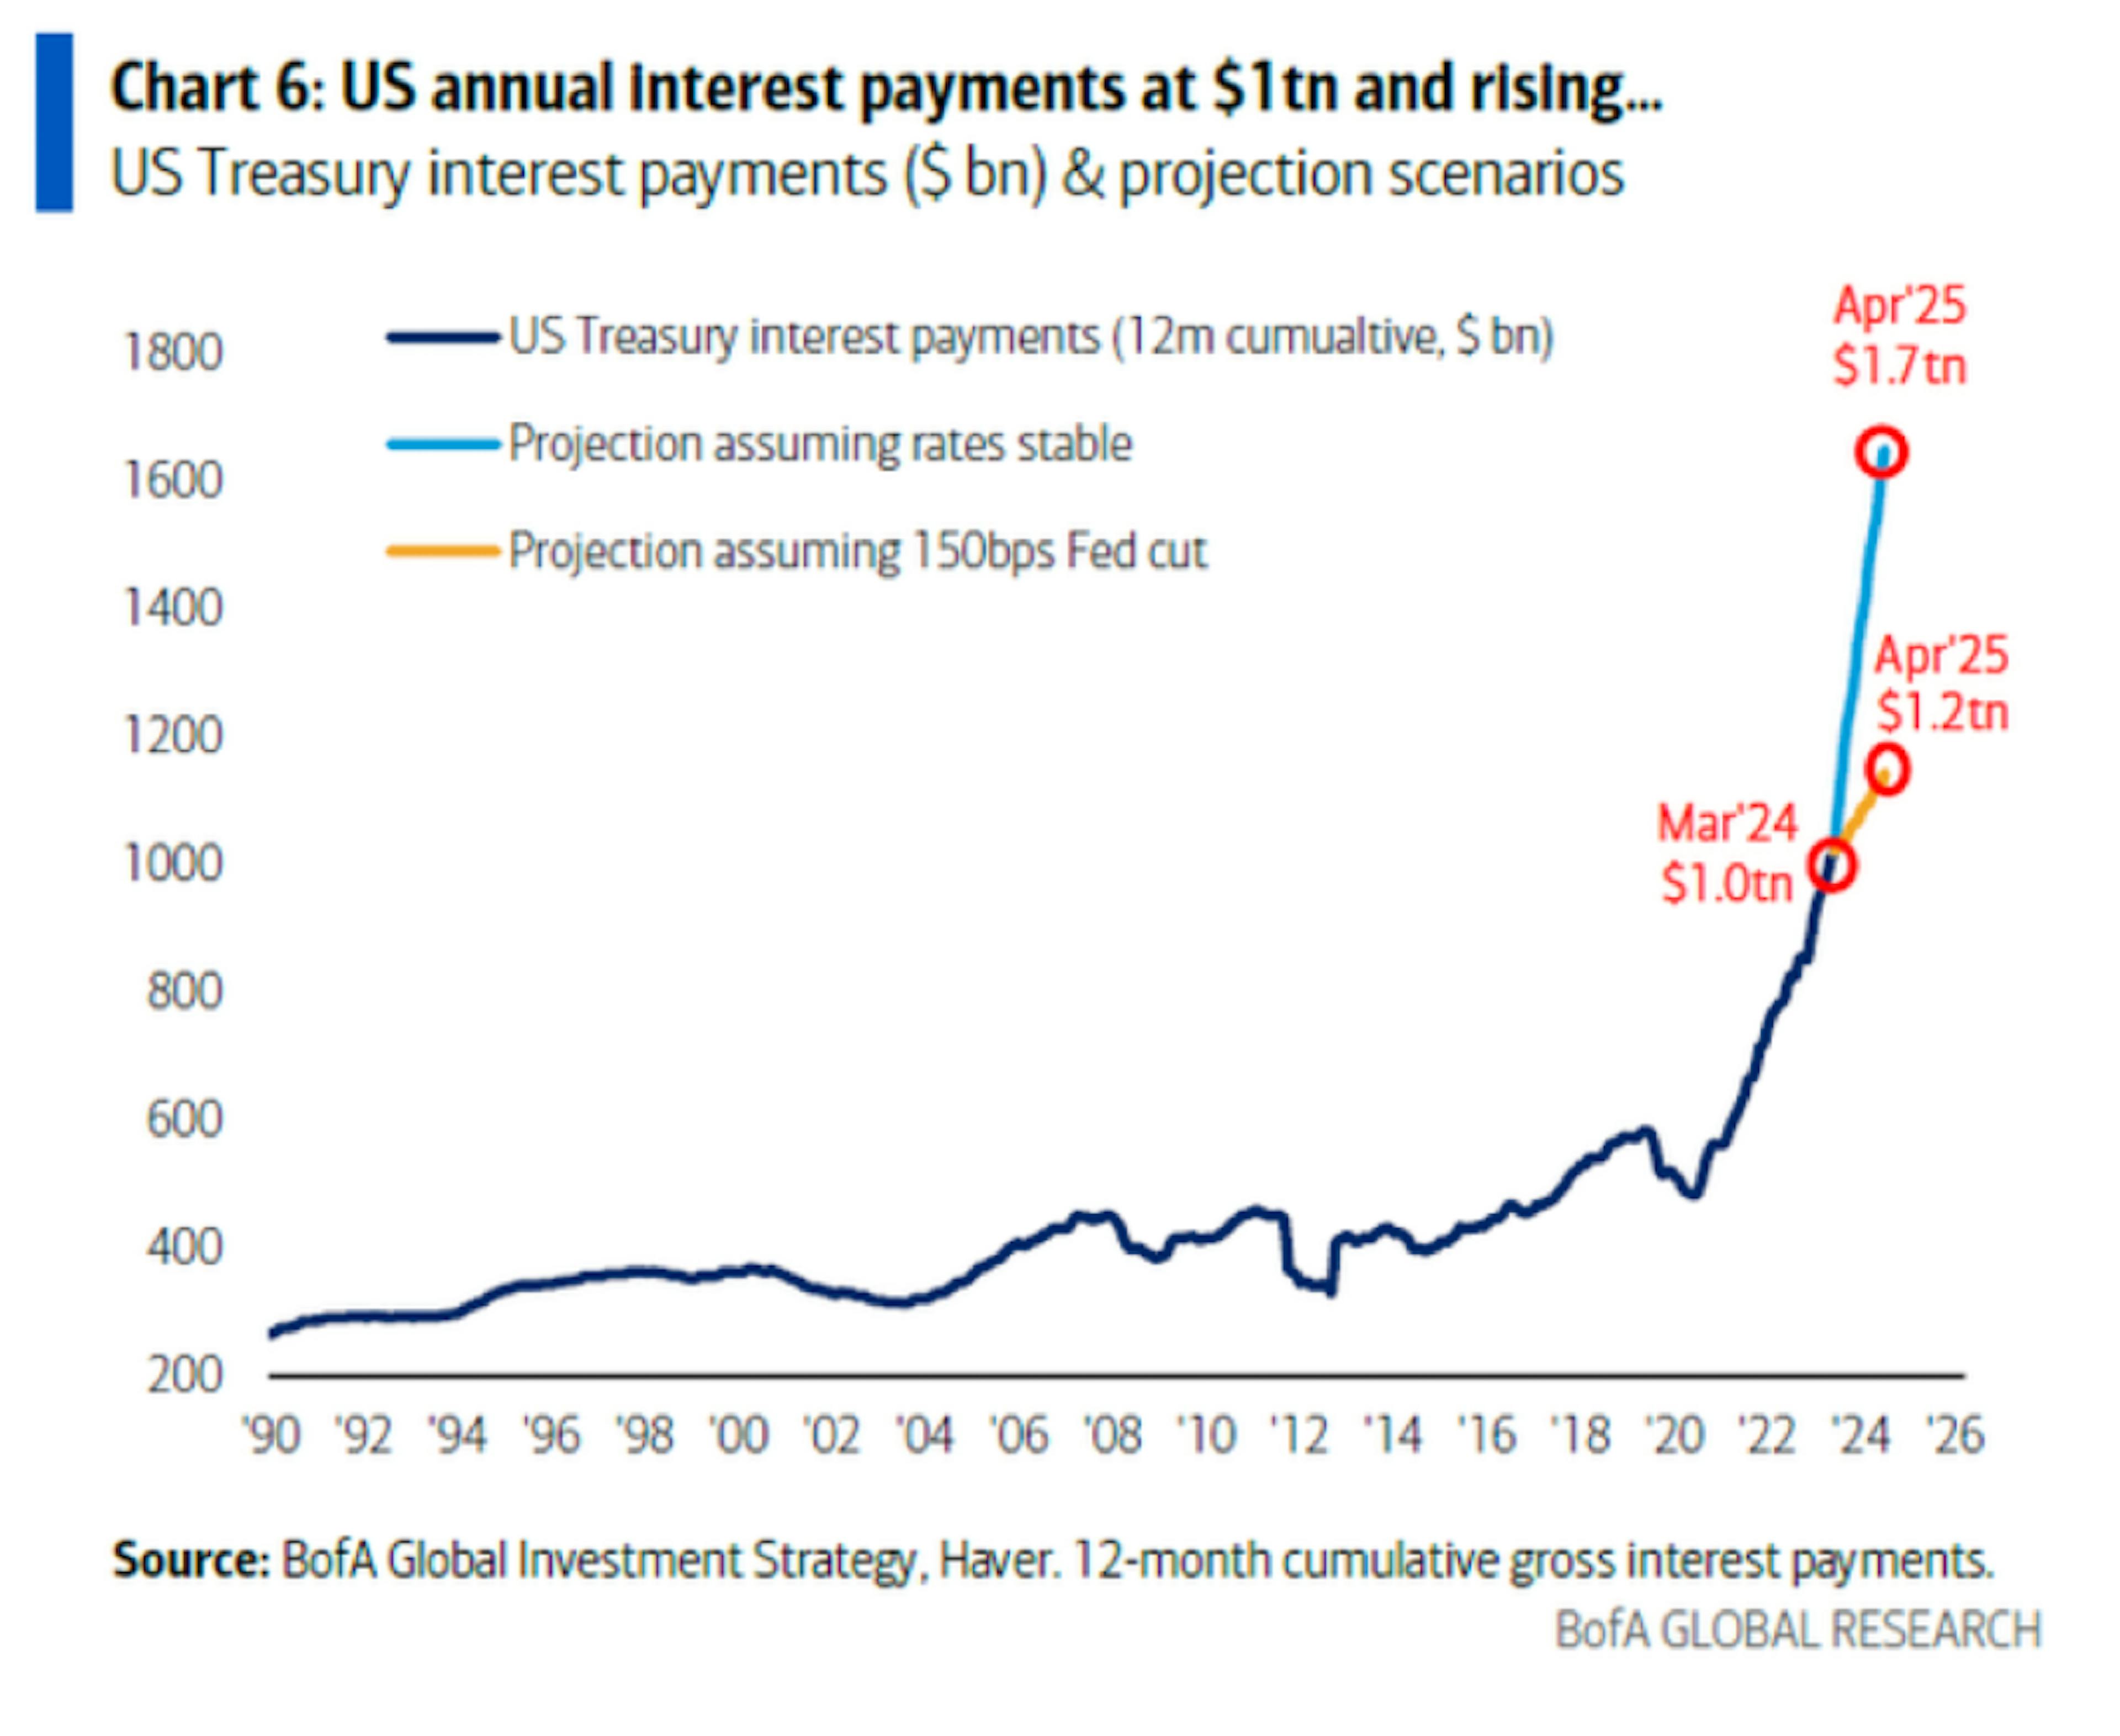 US annual interest payments